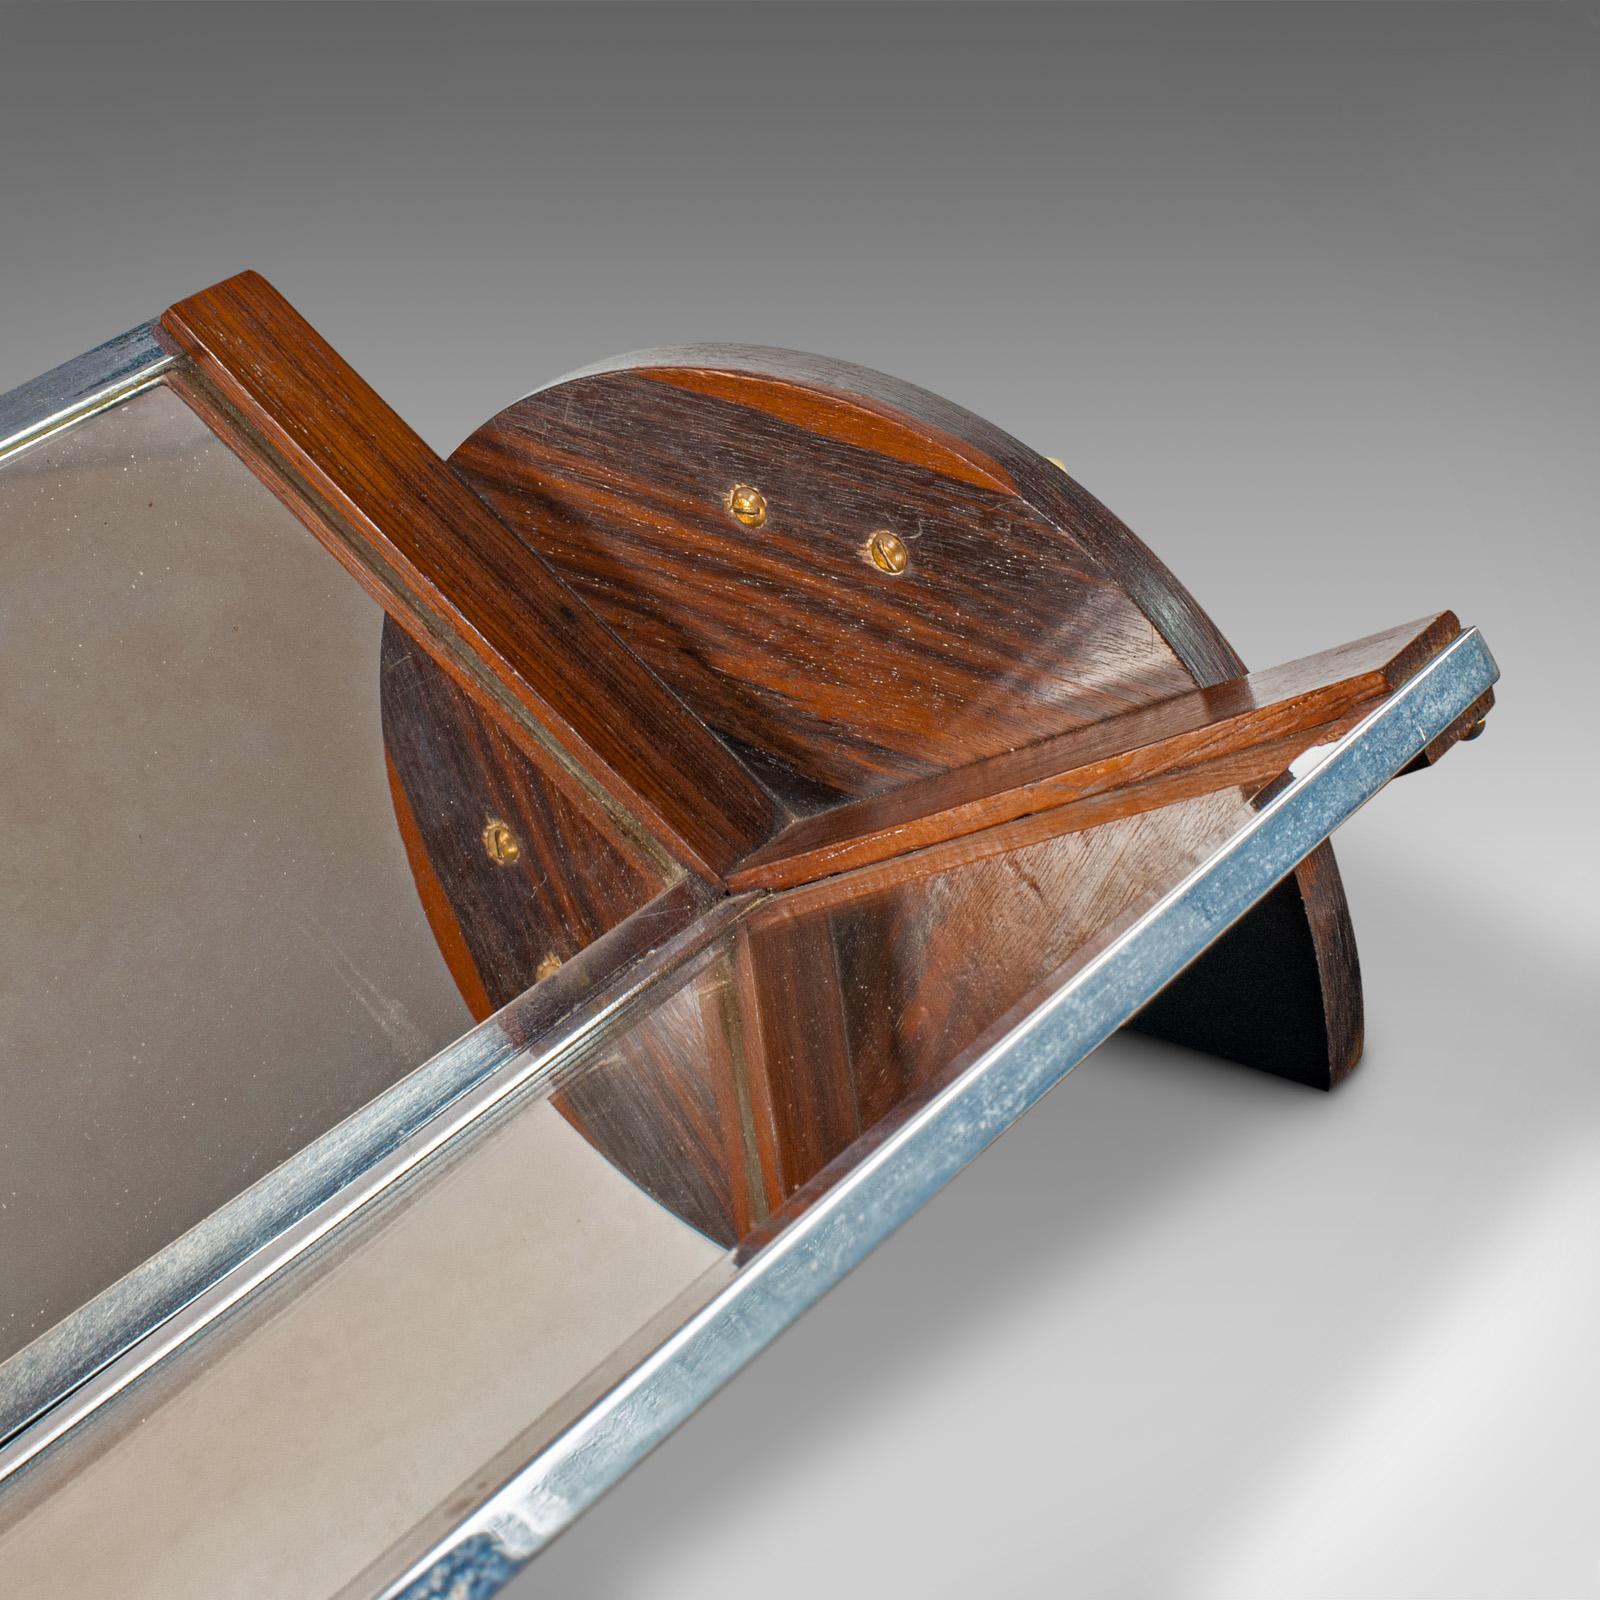 Small Vintage Mirrored Book Trough, English, Novel Rest, Art Deco, Circa 1940 For Sale 3